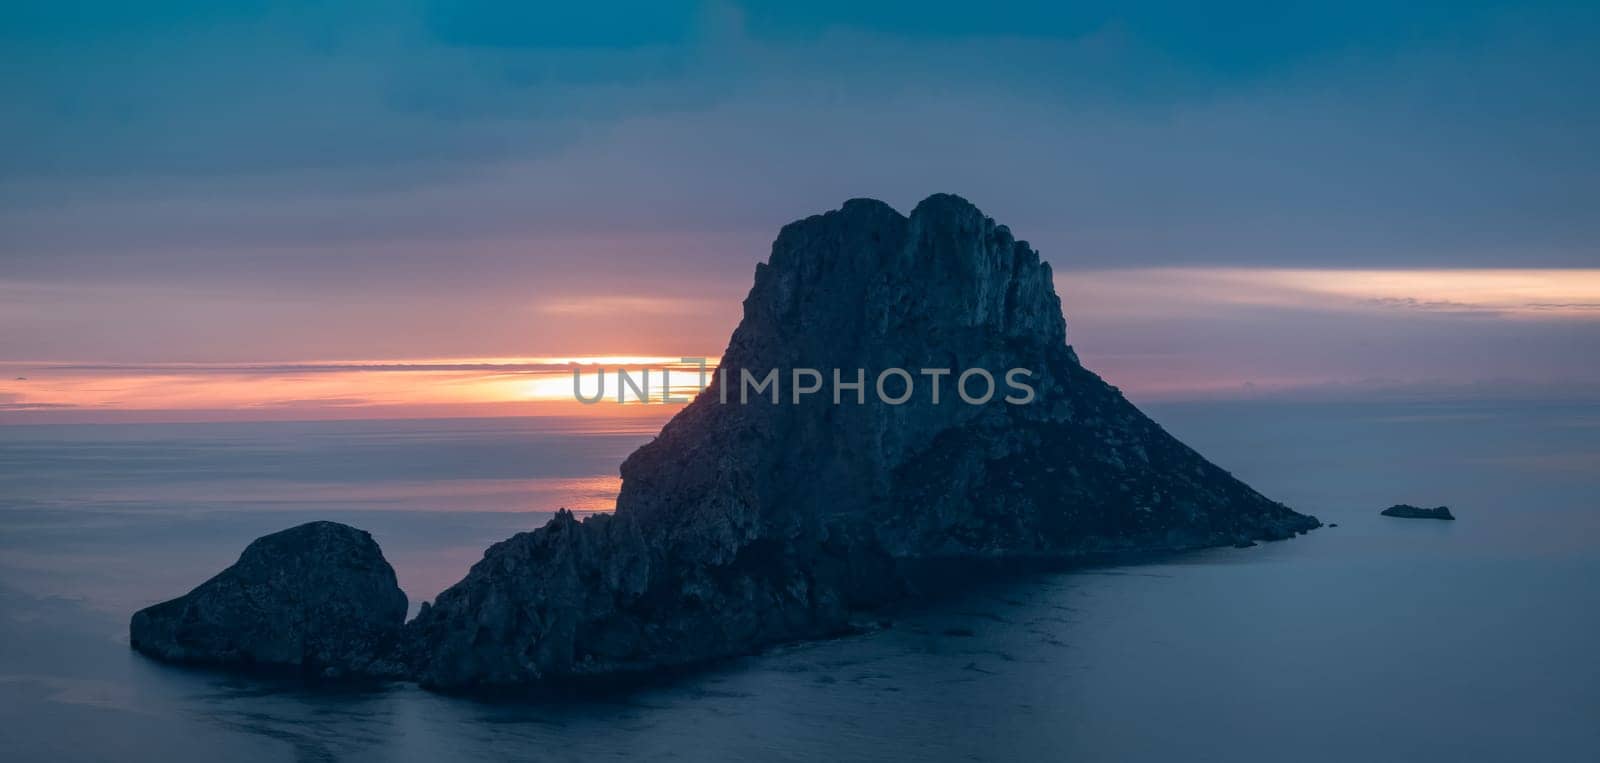 Es Vedra Rock at Sunset in Ibiza with Calm Sea and Sky by FerradalFCG